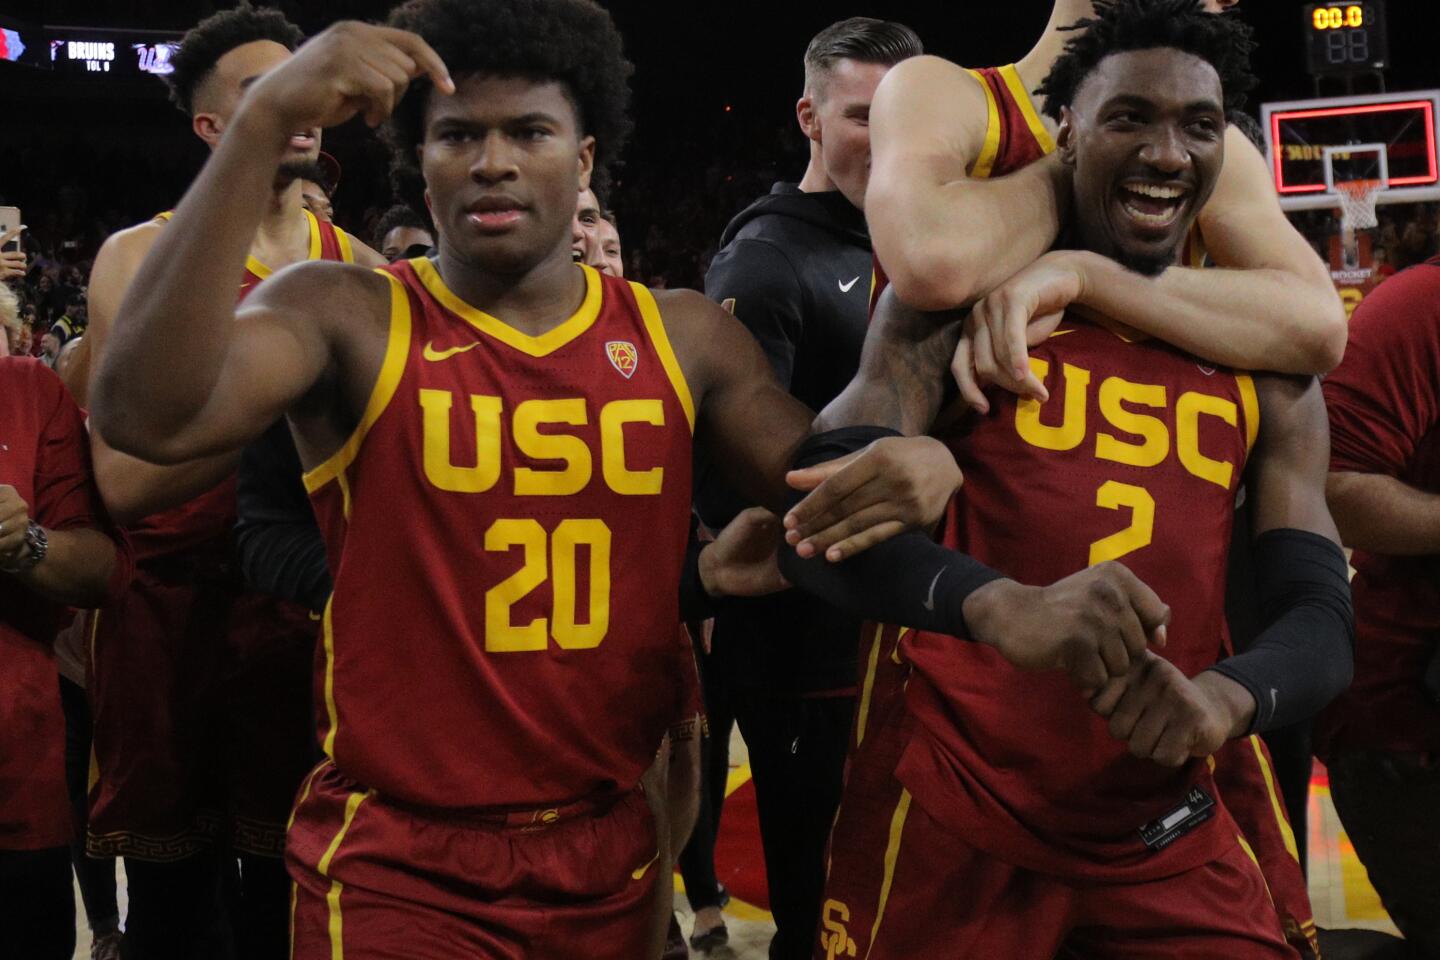 USC guard Jonah Mathews (2) celebrates with teammates Ethan Anderson (20) and Nick Rakocevic after hitting a game-winning three-pointer with less than a second remaining in a 54-52 win at Galen Center on March 7, 2020.